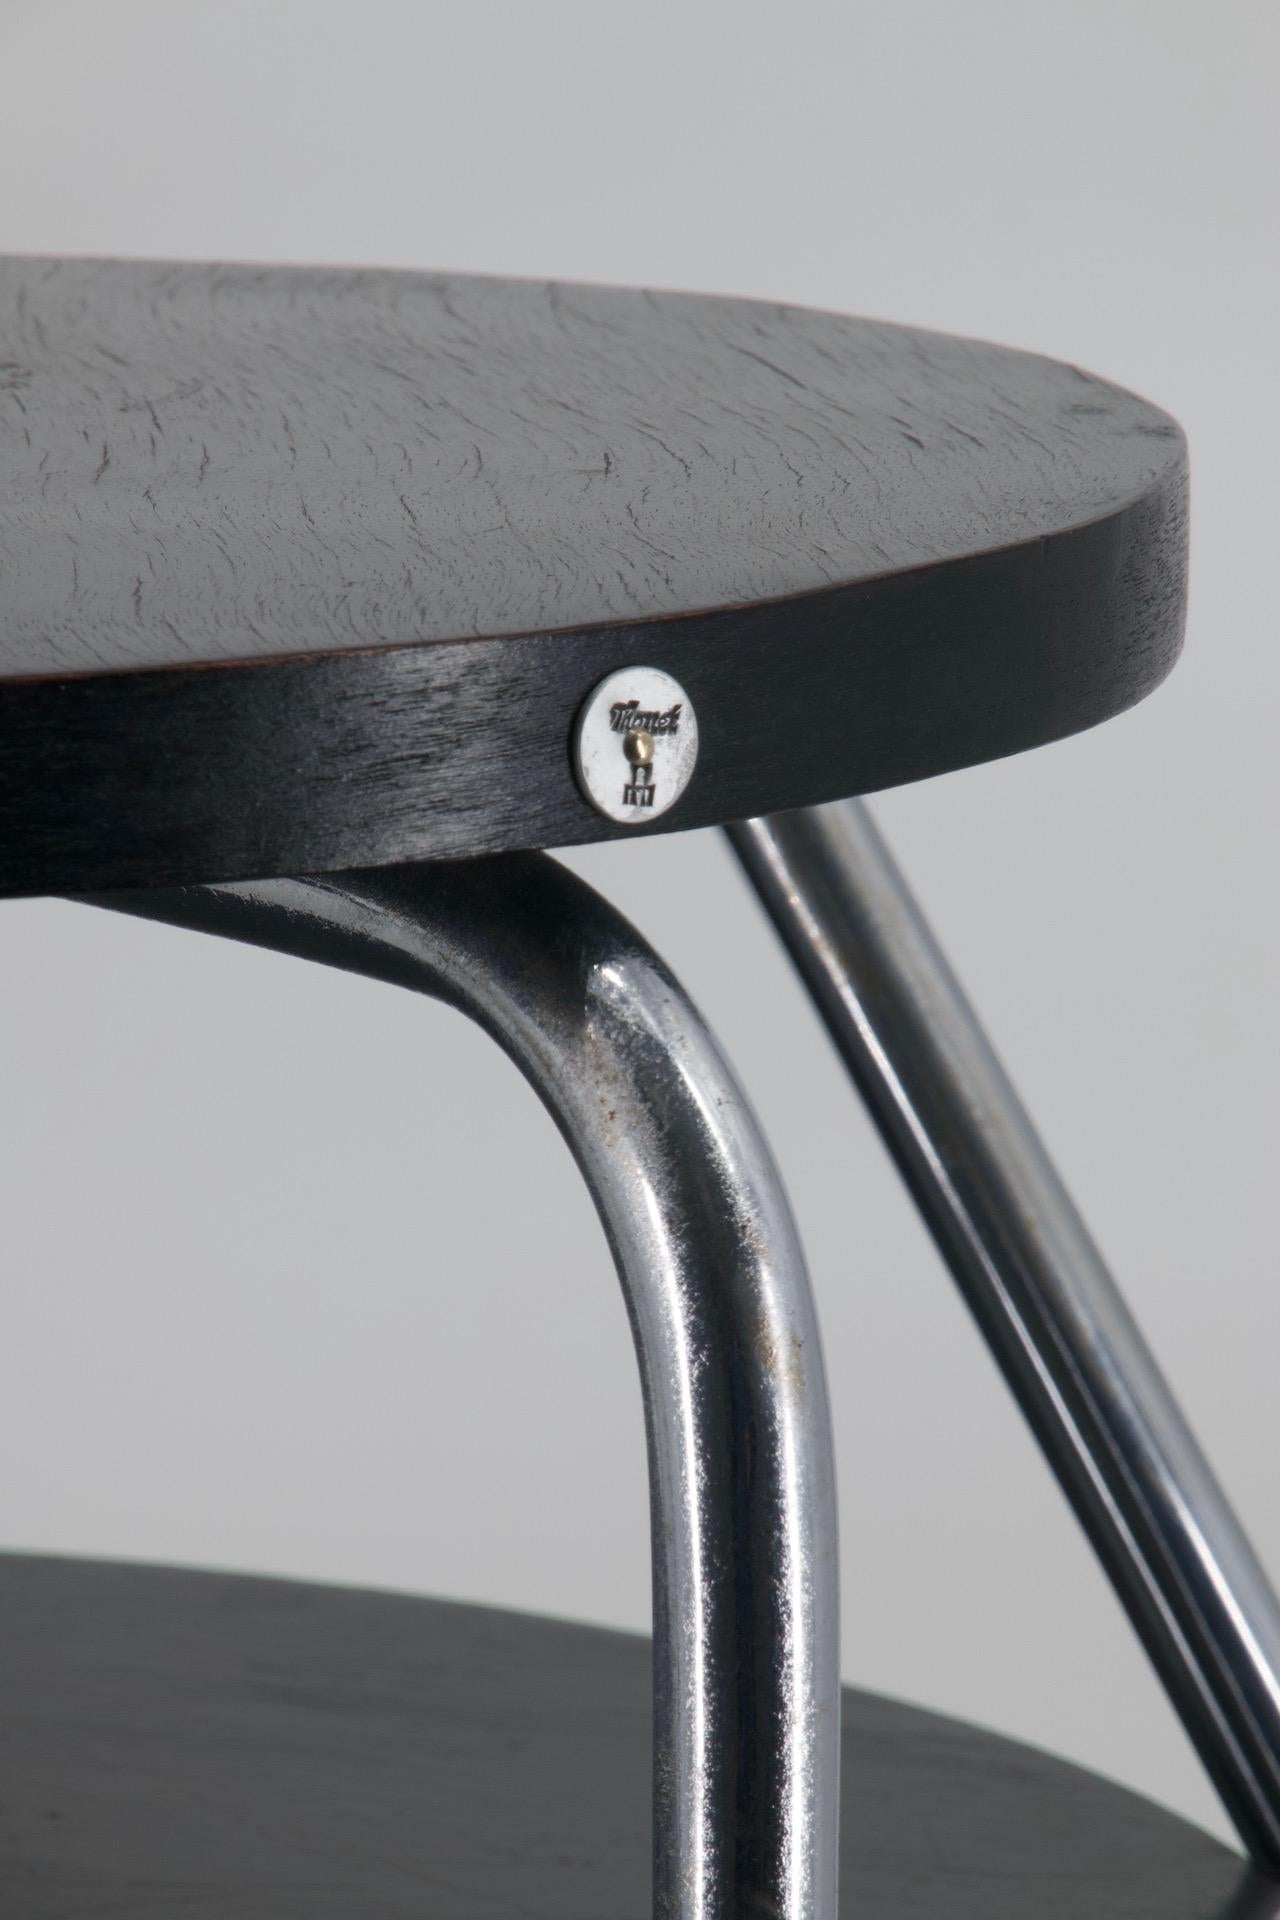 This Thonet 1930s table is the extremely rare model B153, the smoker's table, identified in a 1930s Thonet catalogue - see picture. A unique and Avant Garde design with an asymmetric chromed steel tubular structure and two lacquered black wood all